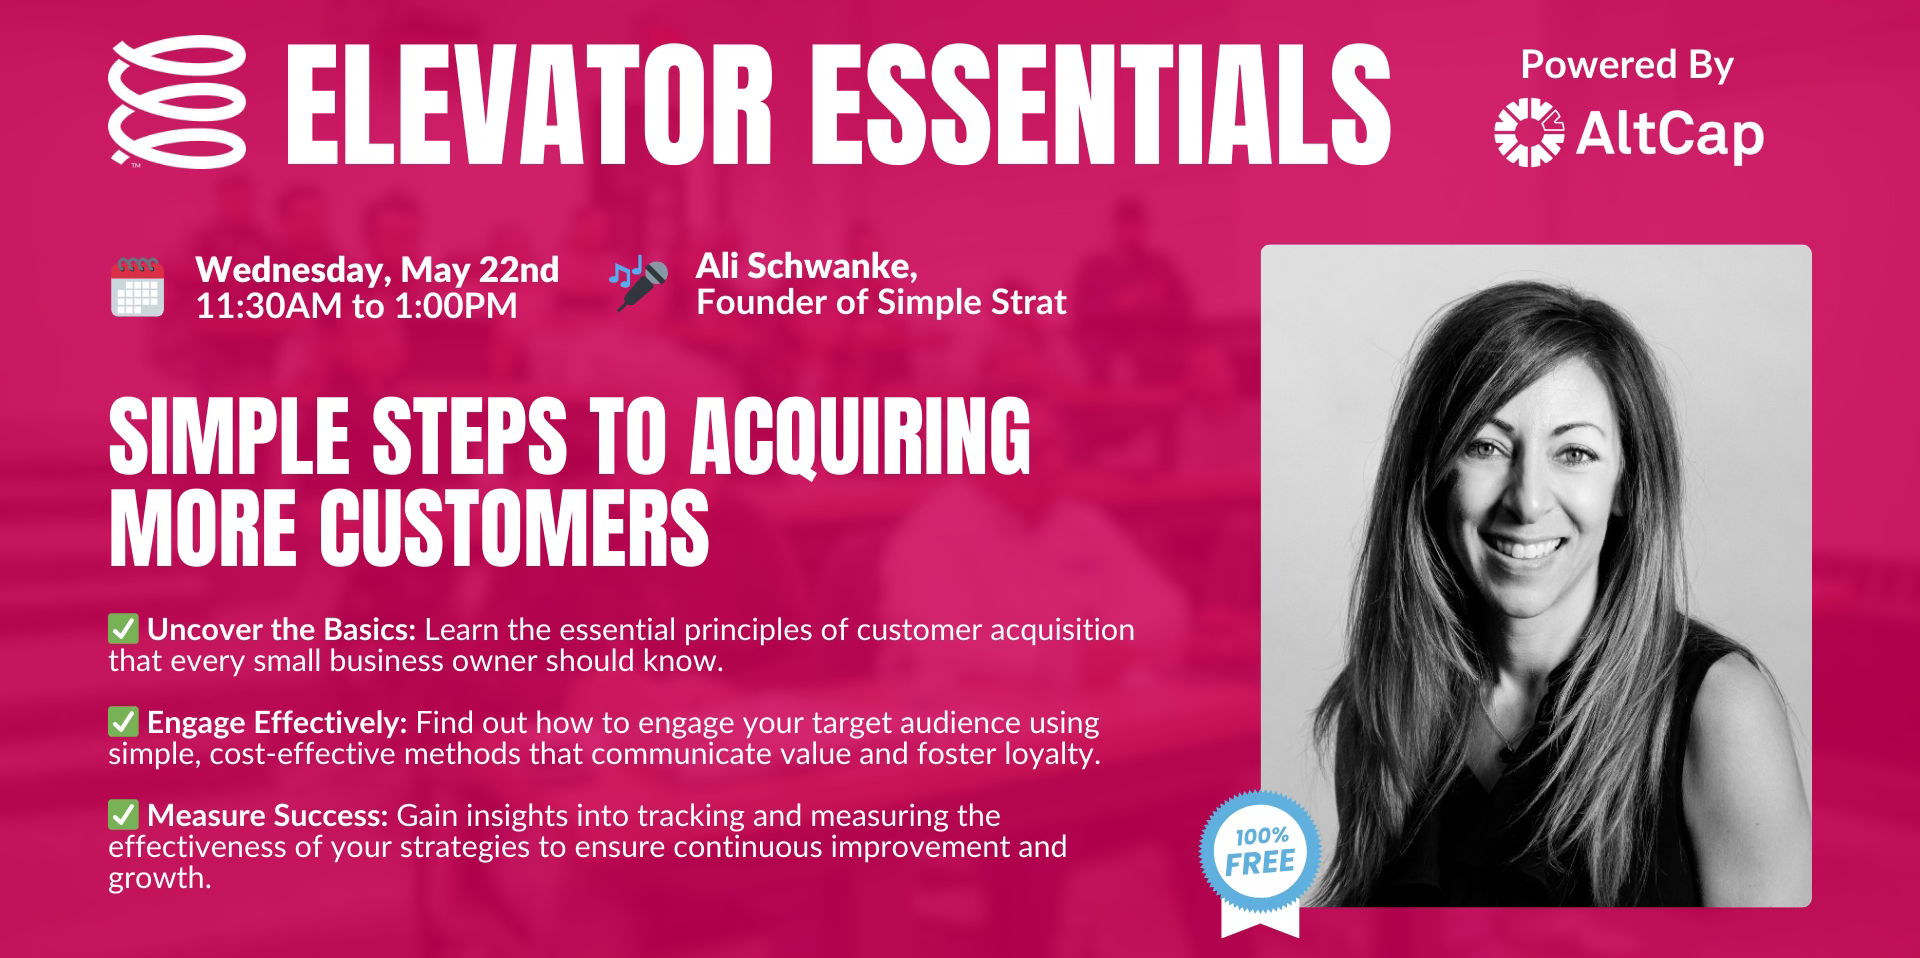 Elevator Essentials | Simple Steps to Acquiring More Customers promotional image